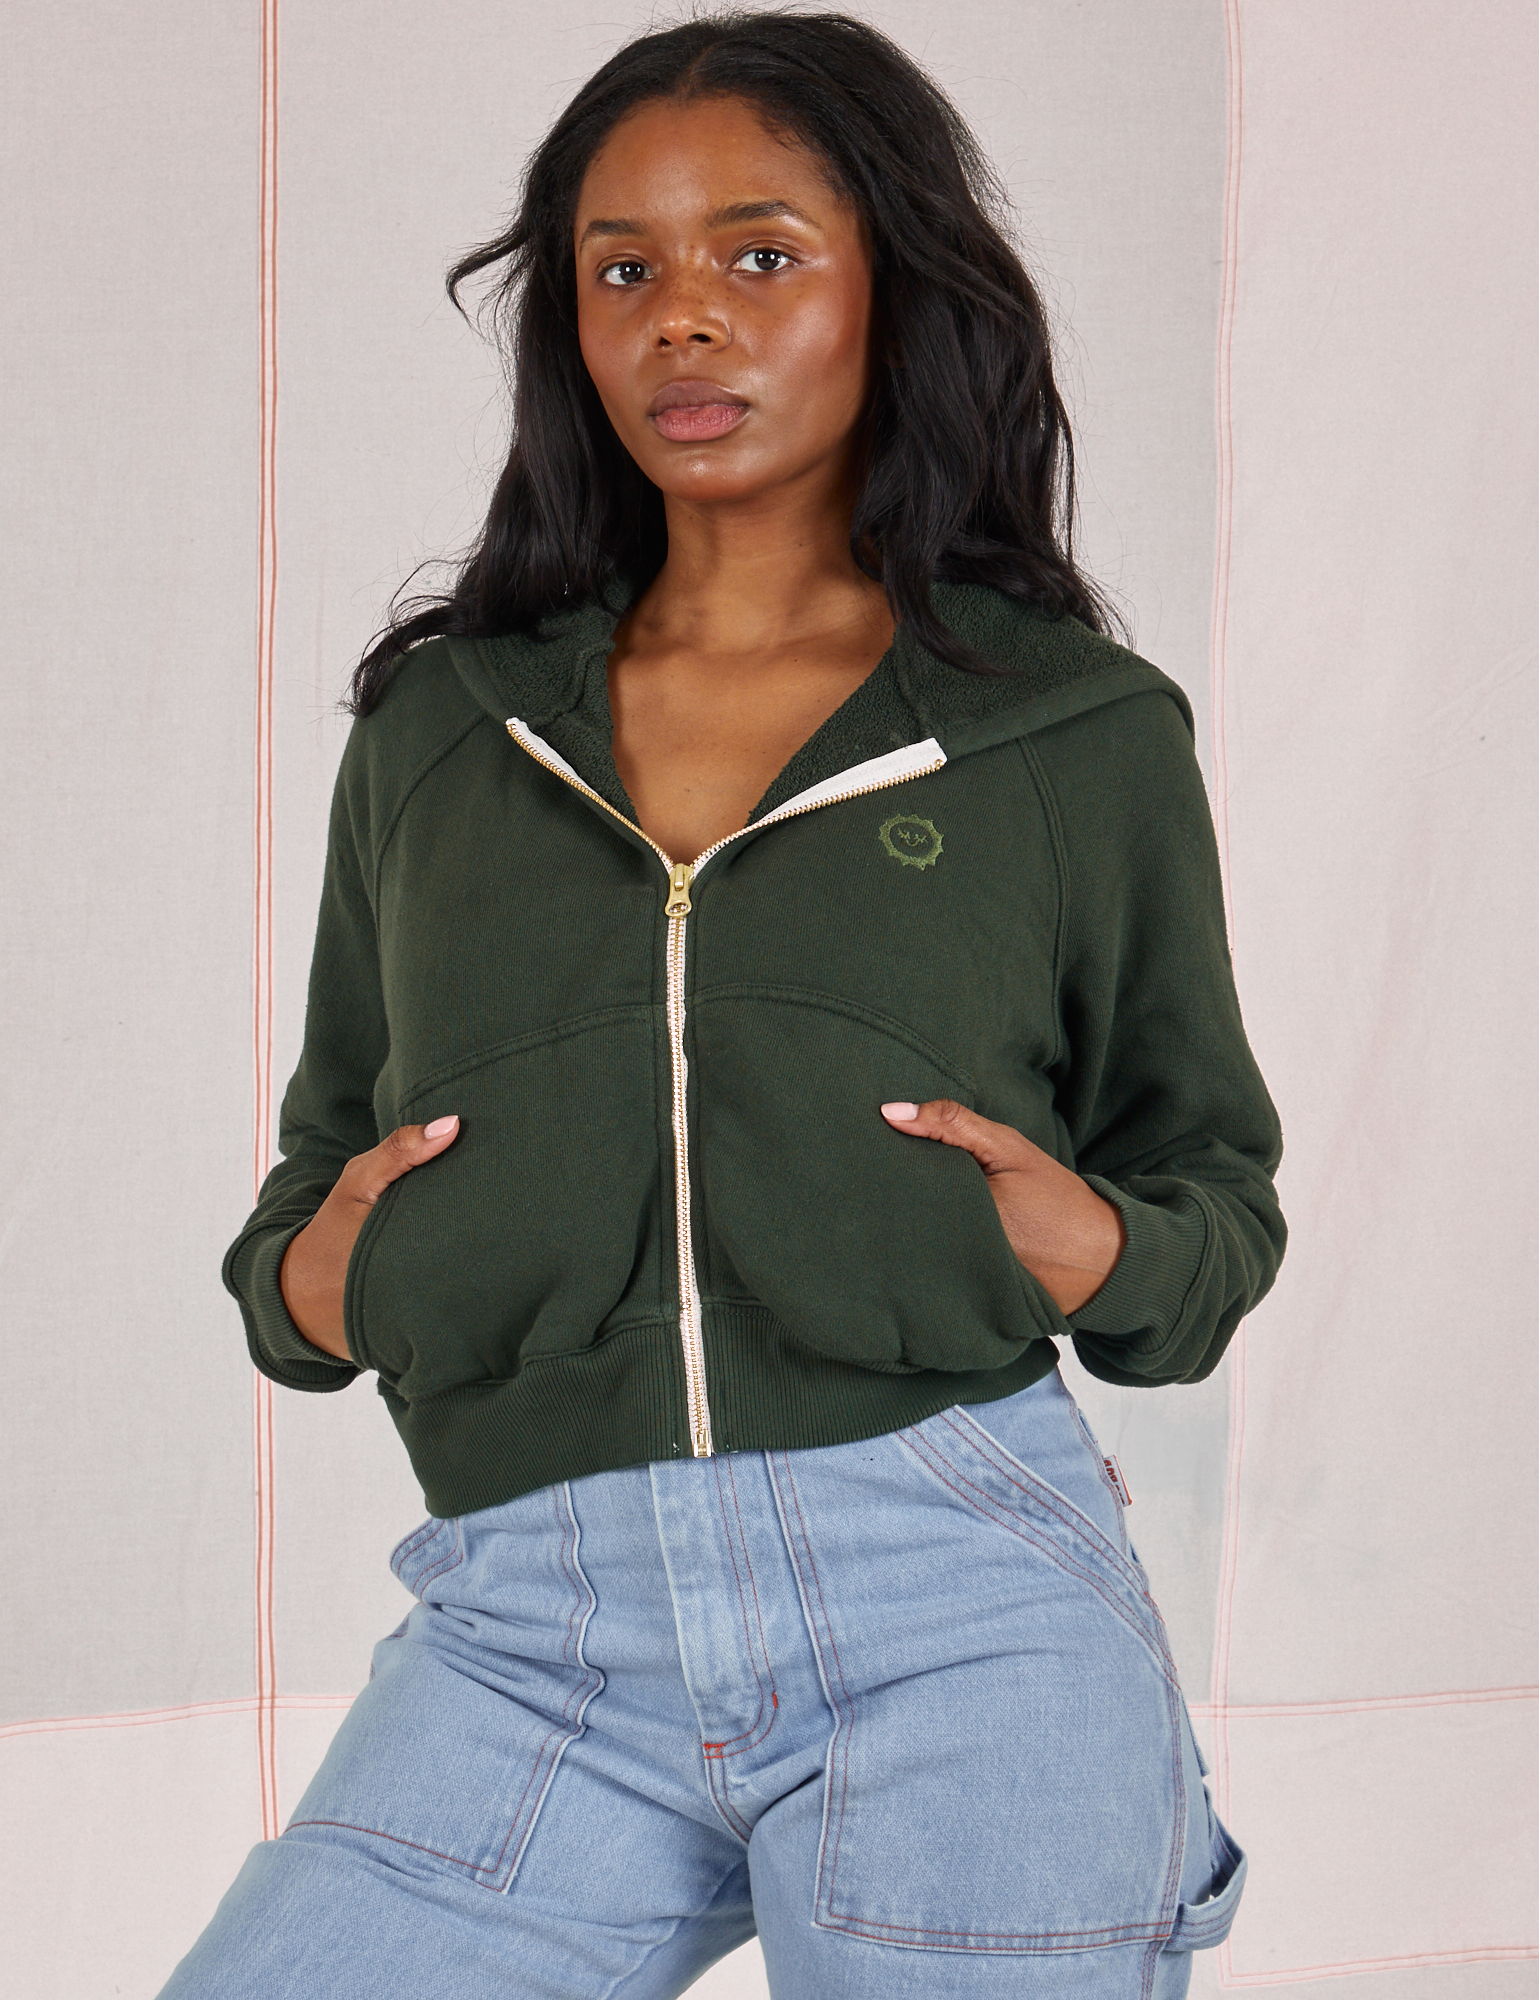 Kandia is wearing a zipped up Cropped Zip Hoodie in Swamp Green and light wash Carpenter Jeans